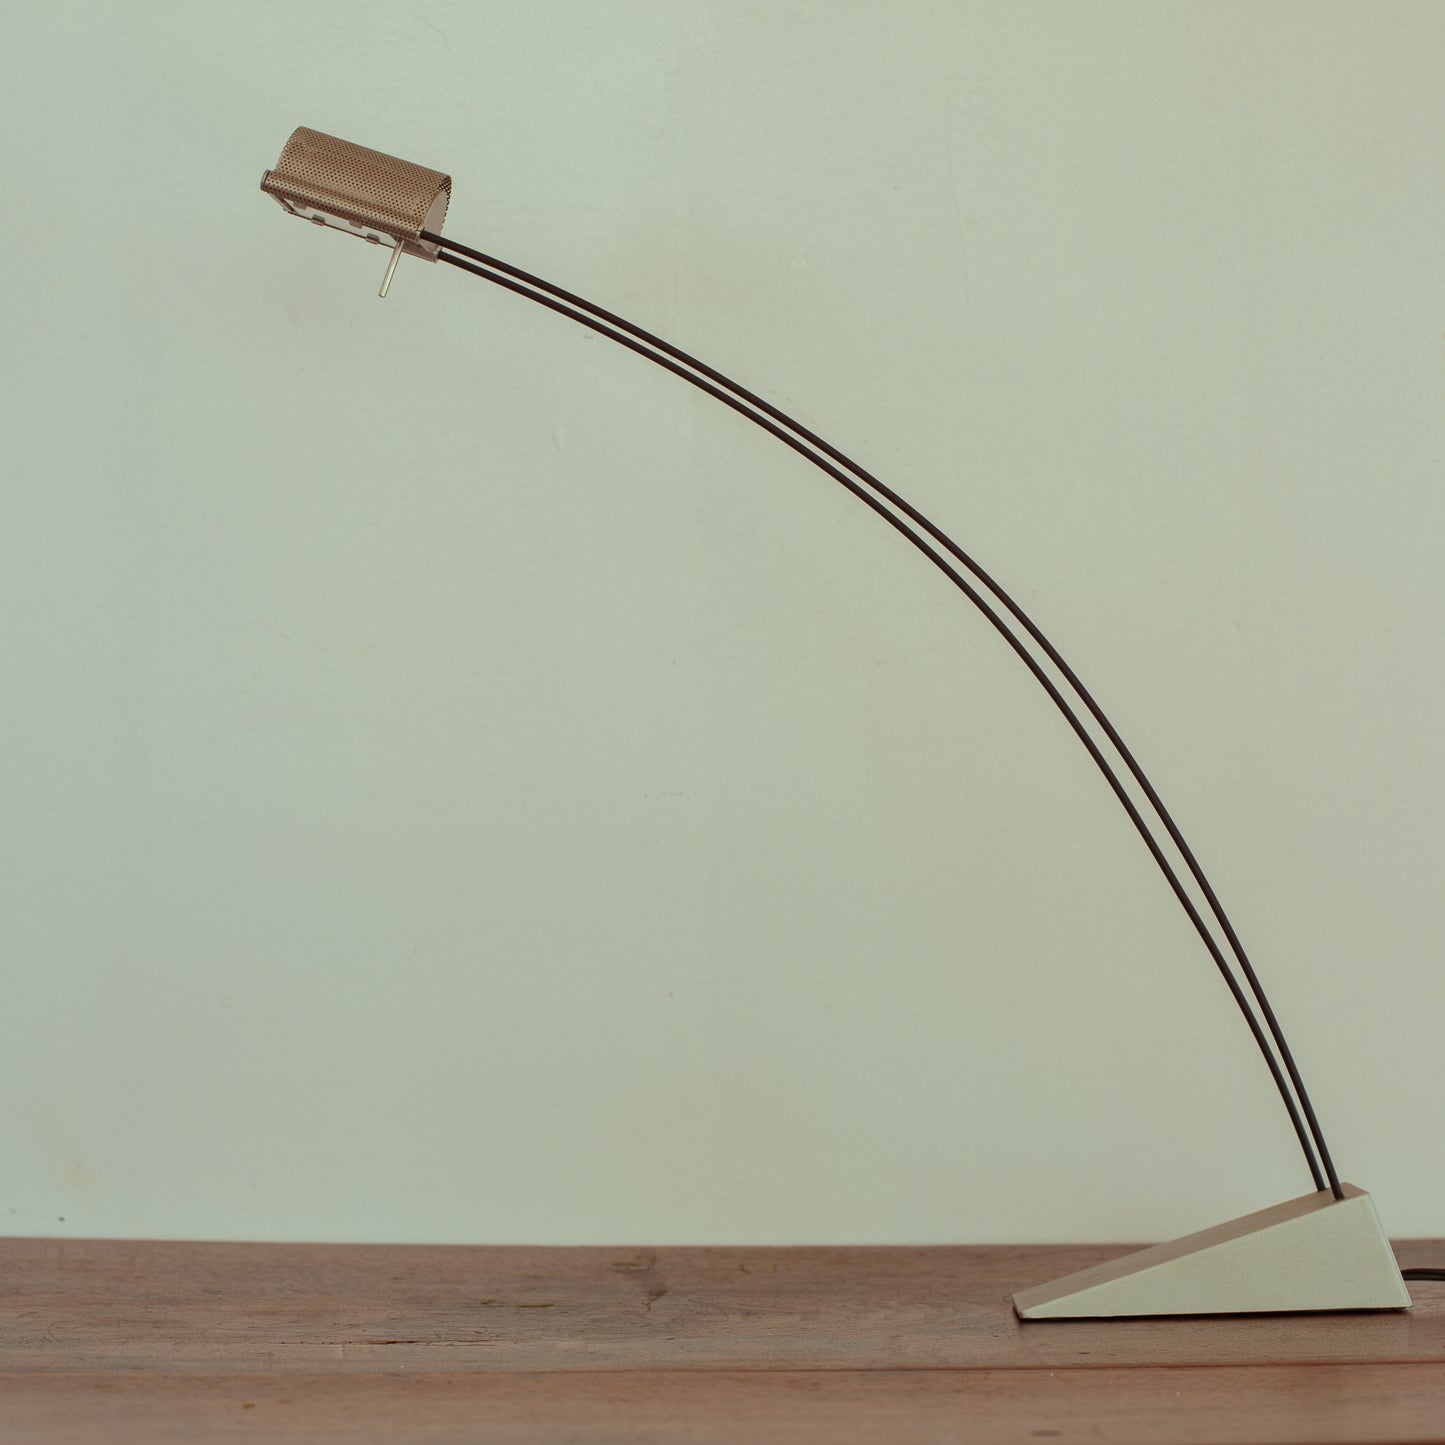 Vintage 1990s "Paperclip by Kovacs" Style Lamp